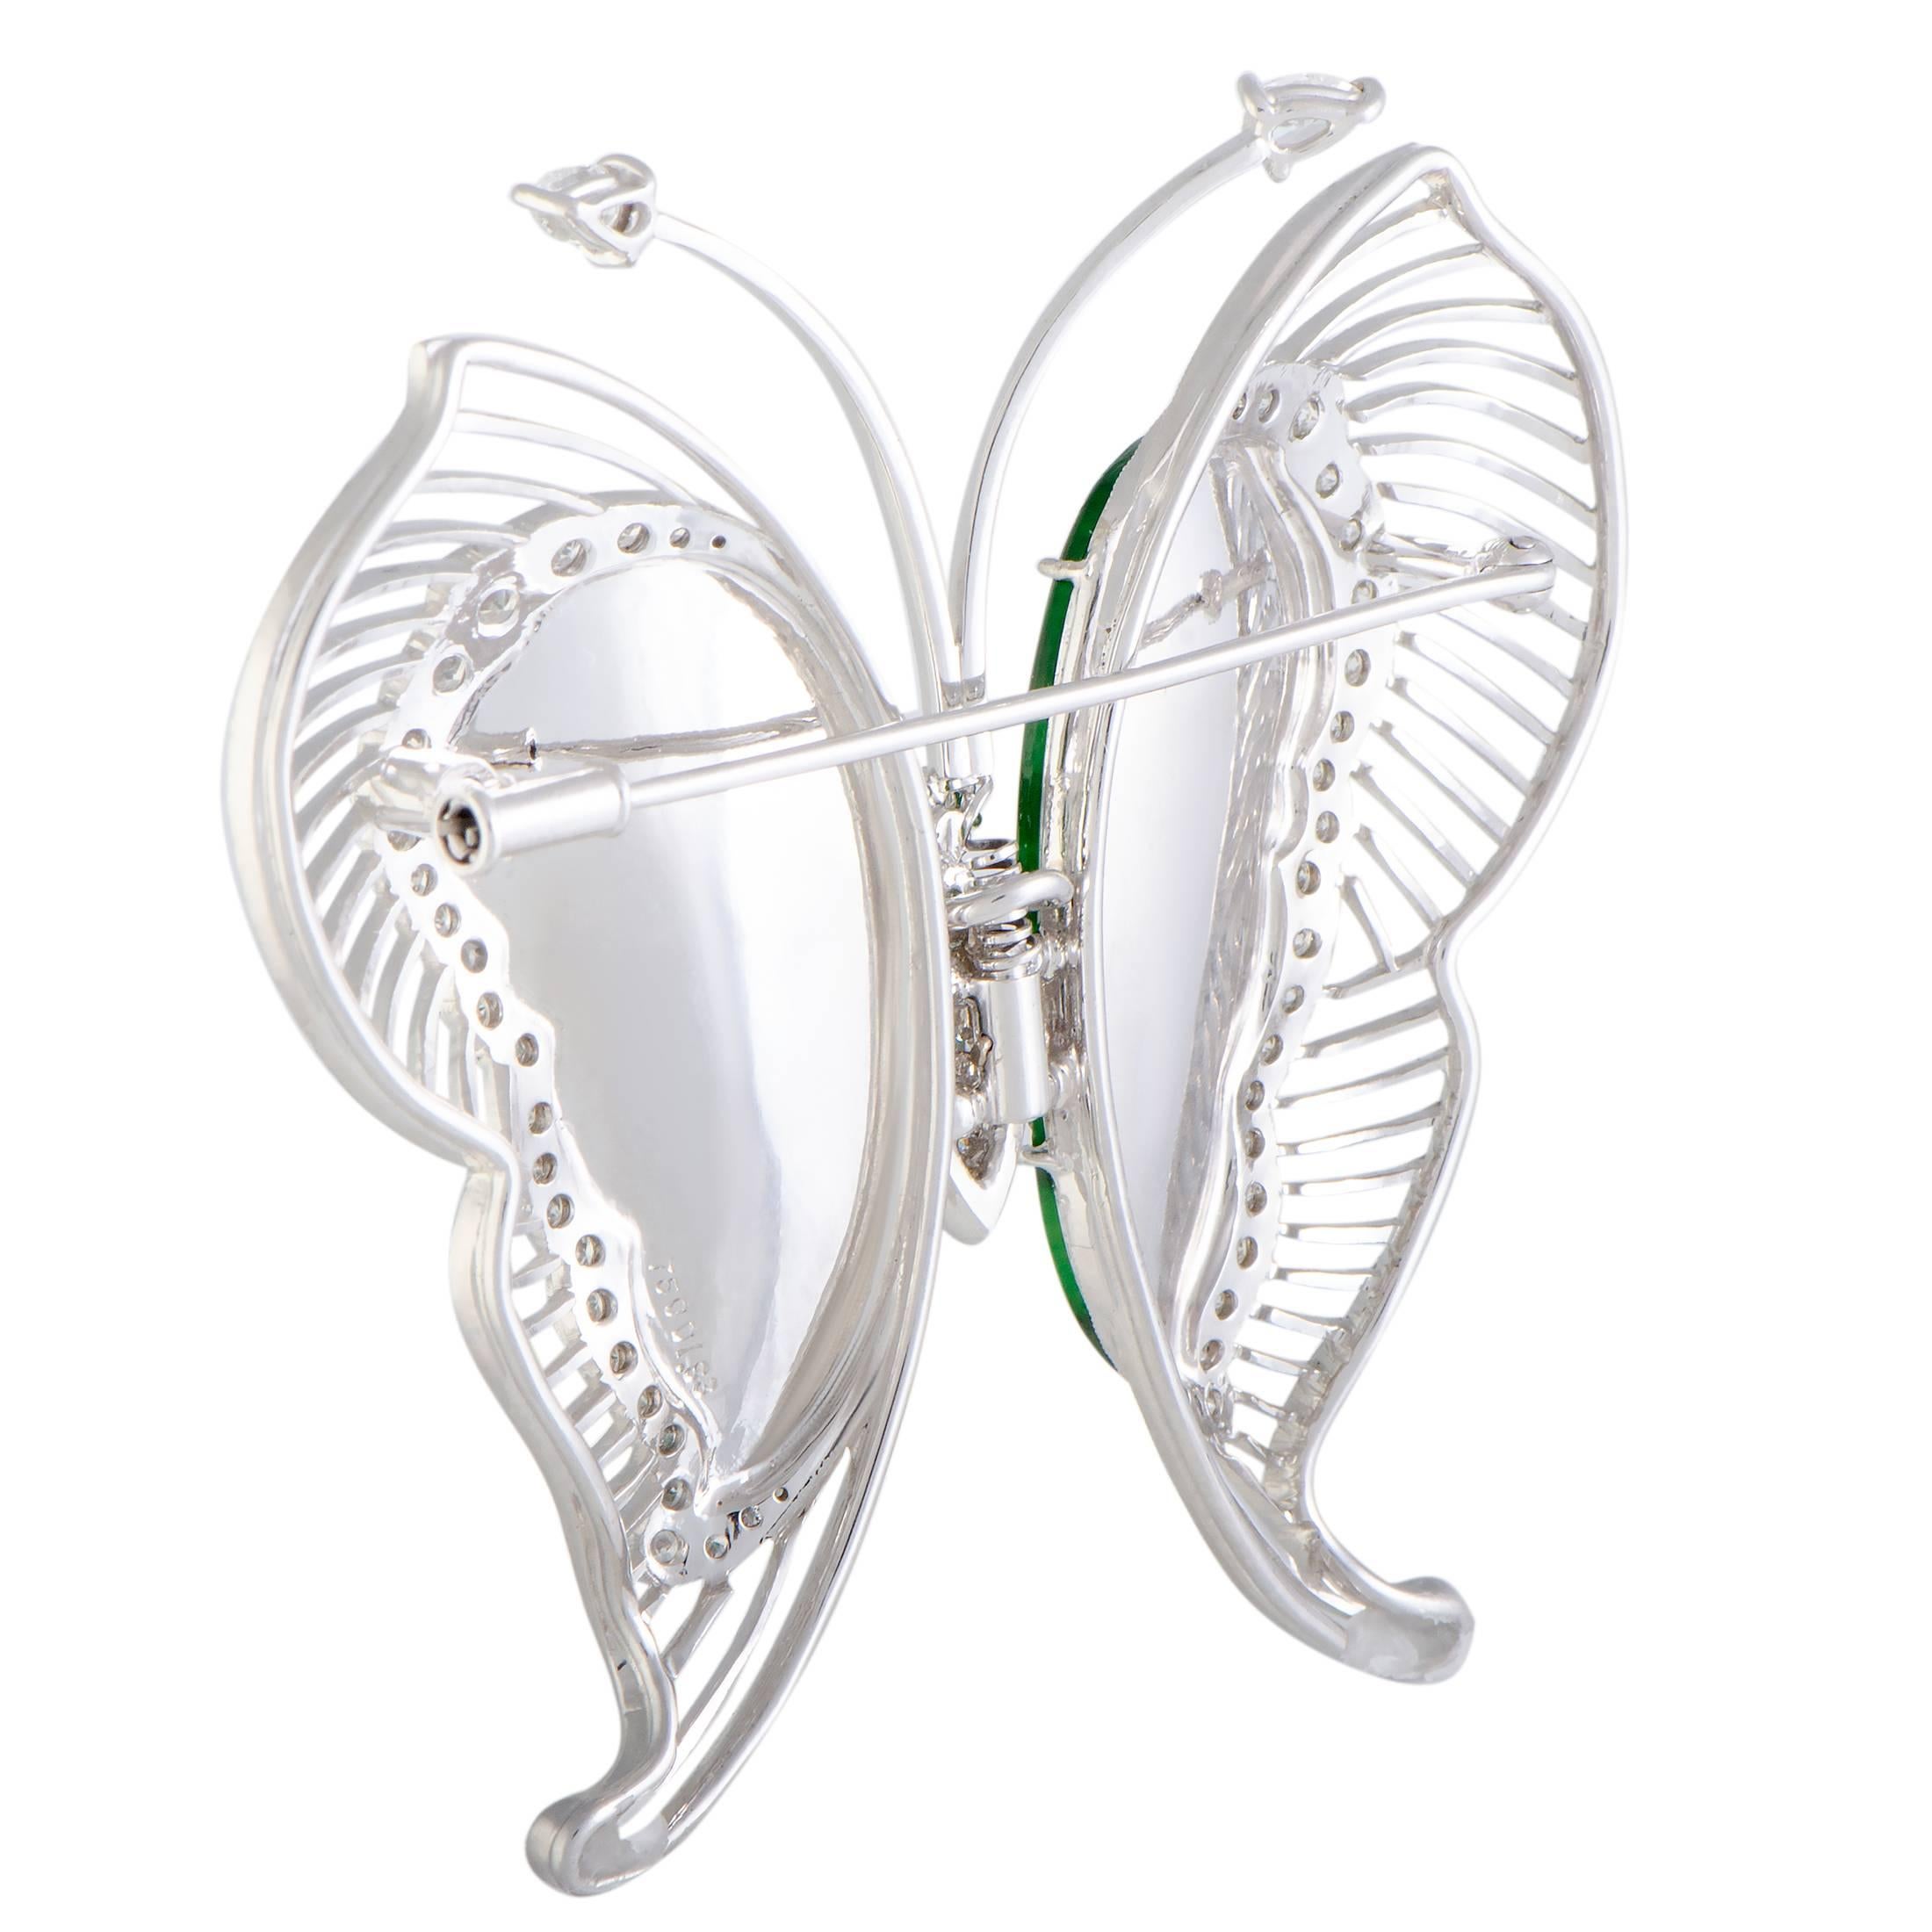 Designed in a gorgeously imaginative manner and splendidly embellished with attractive gems, this fabulous brooch boasts a stunningly fashionable appeal. Expertly crafted from elegant 18K white gold, the brooch is set with green jades that weigh